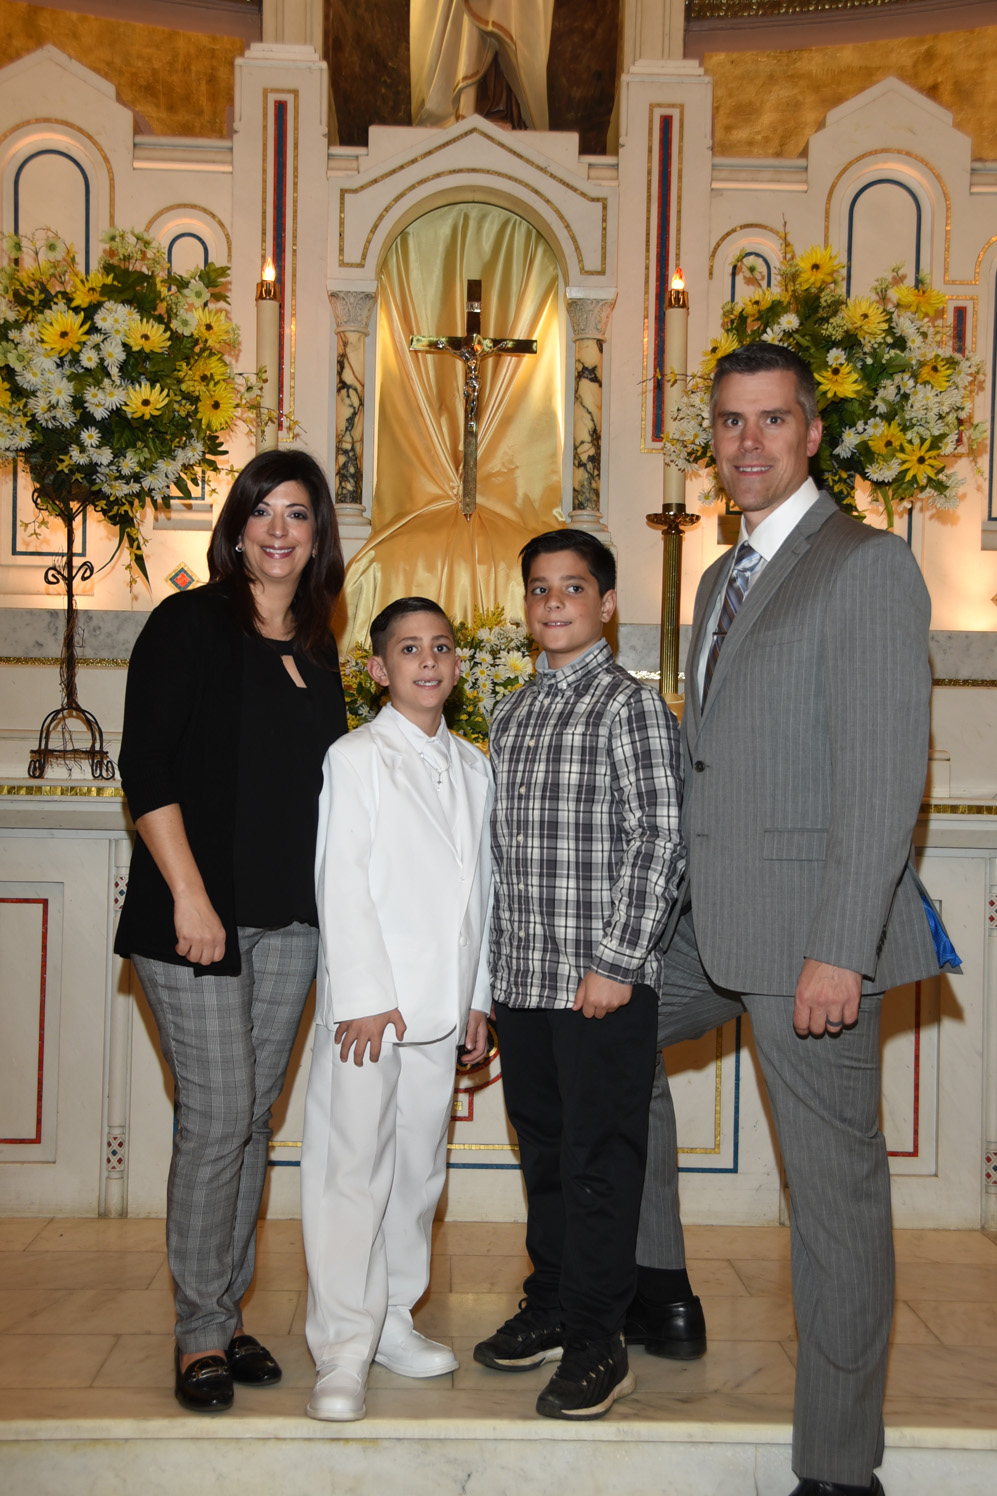 FIRST-COMMUNION-MAY-1-2021-1081